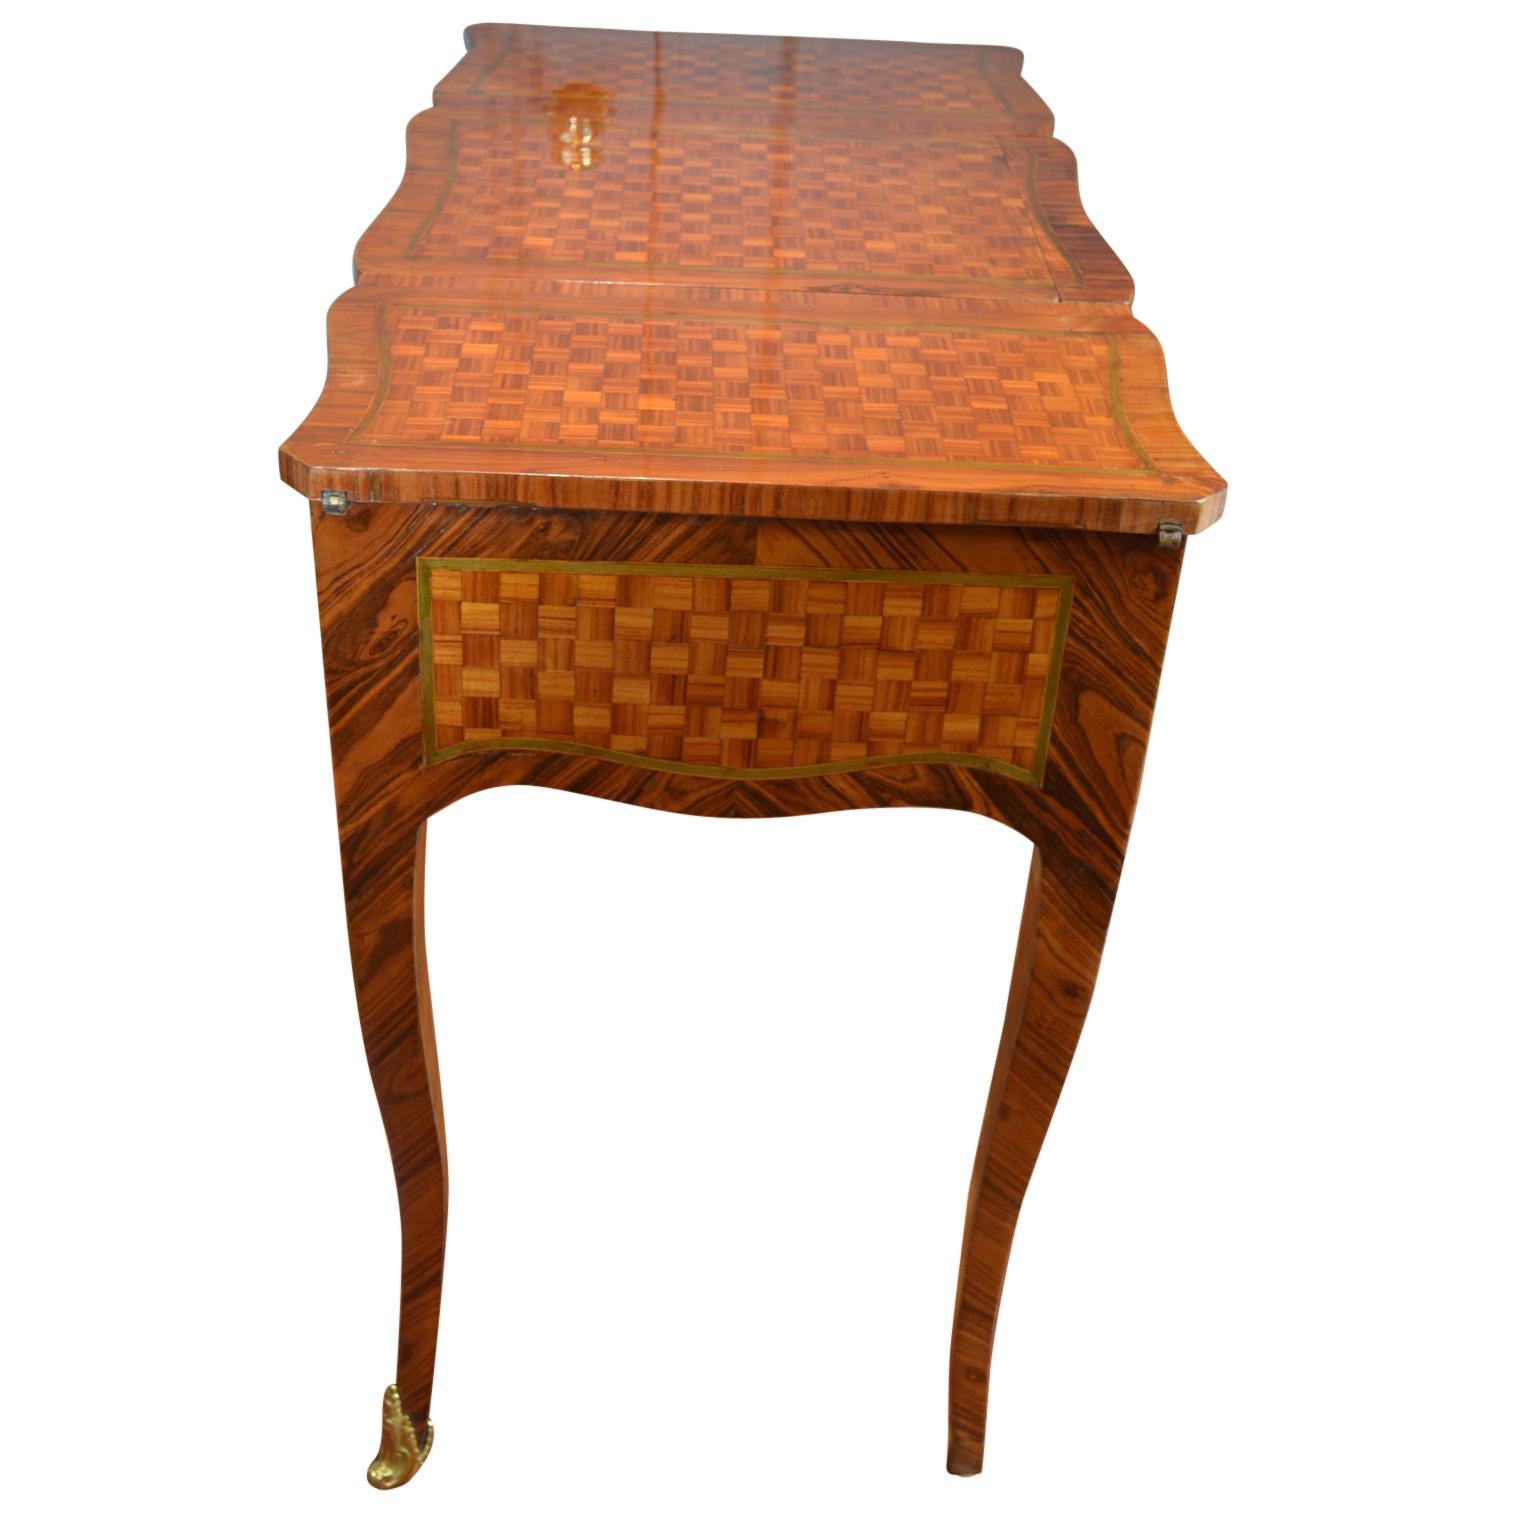 A beautifully inlaid marquetry coiffeuse in the pure Louis XV style; the carcass inlaid in tulipwood, kingwood and amaranth woods resting on cabriole legs; the top central section lifts back and slides to reveal a work surface and make-up mirror;